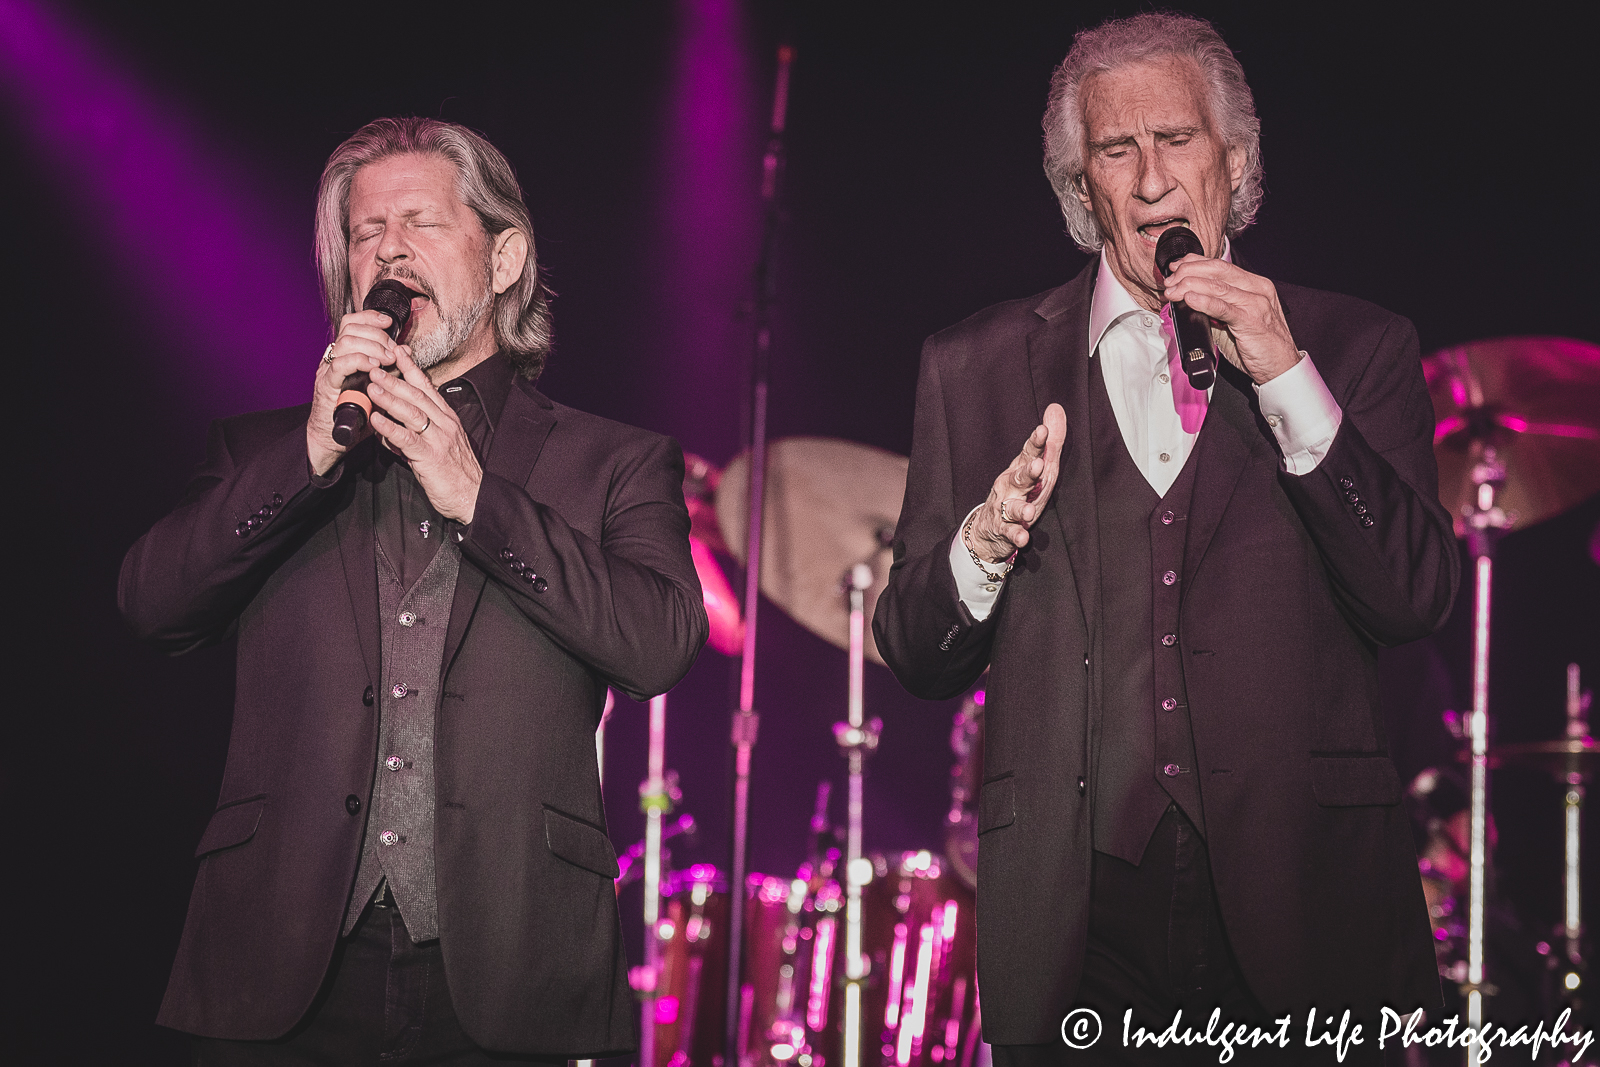 Live concert at Prairie Band Casino in Mayetta, KS featuring The Righteous Brothers on June 29, 2023.